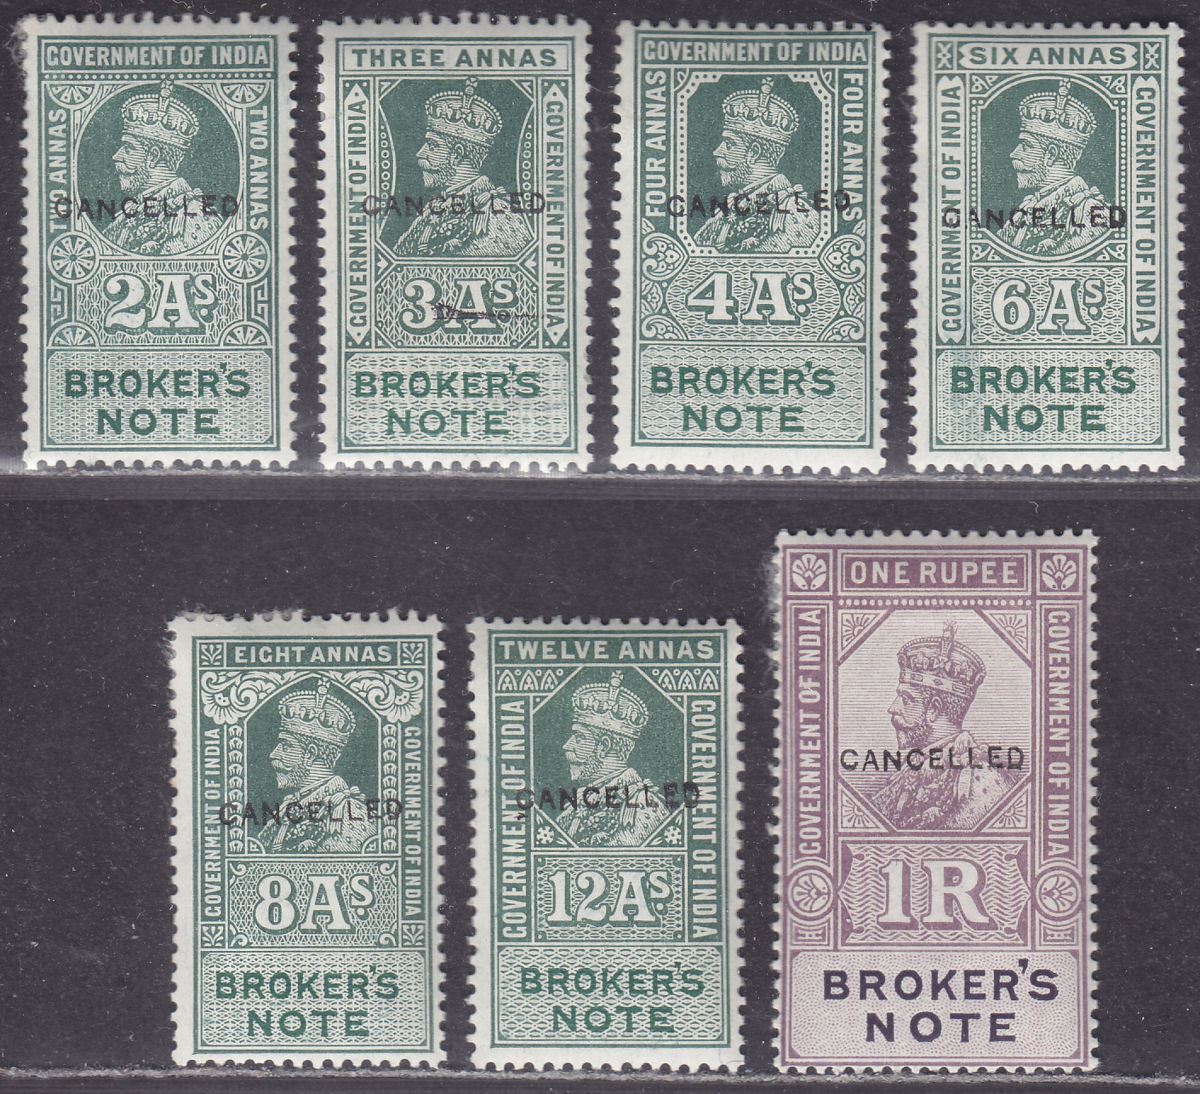 India 1923 KGV Revenue Broker's Note Type 25 CANCELLED Set BF11c-BF17c